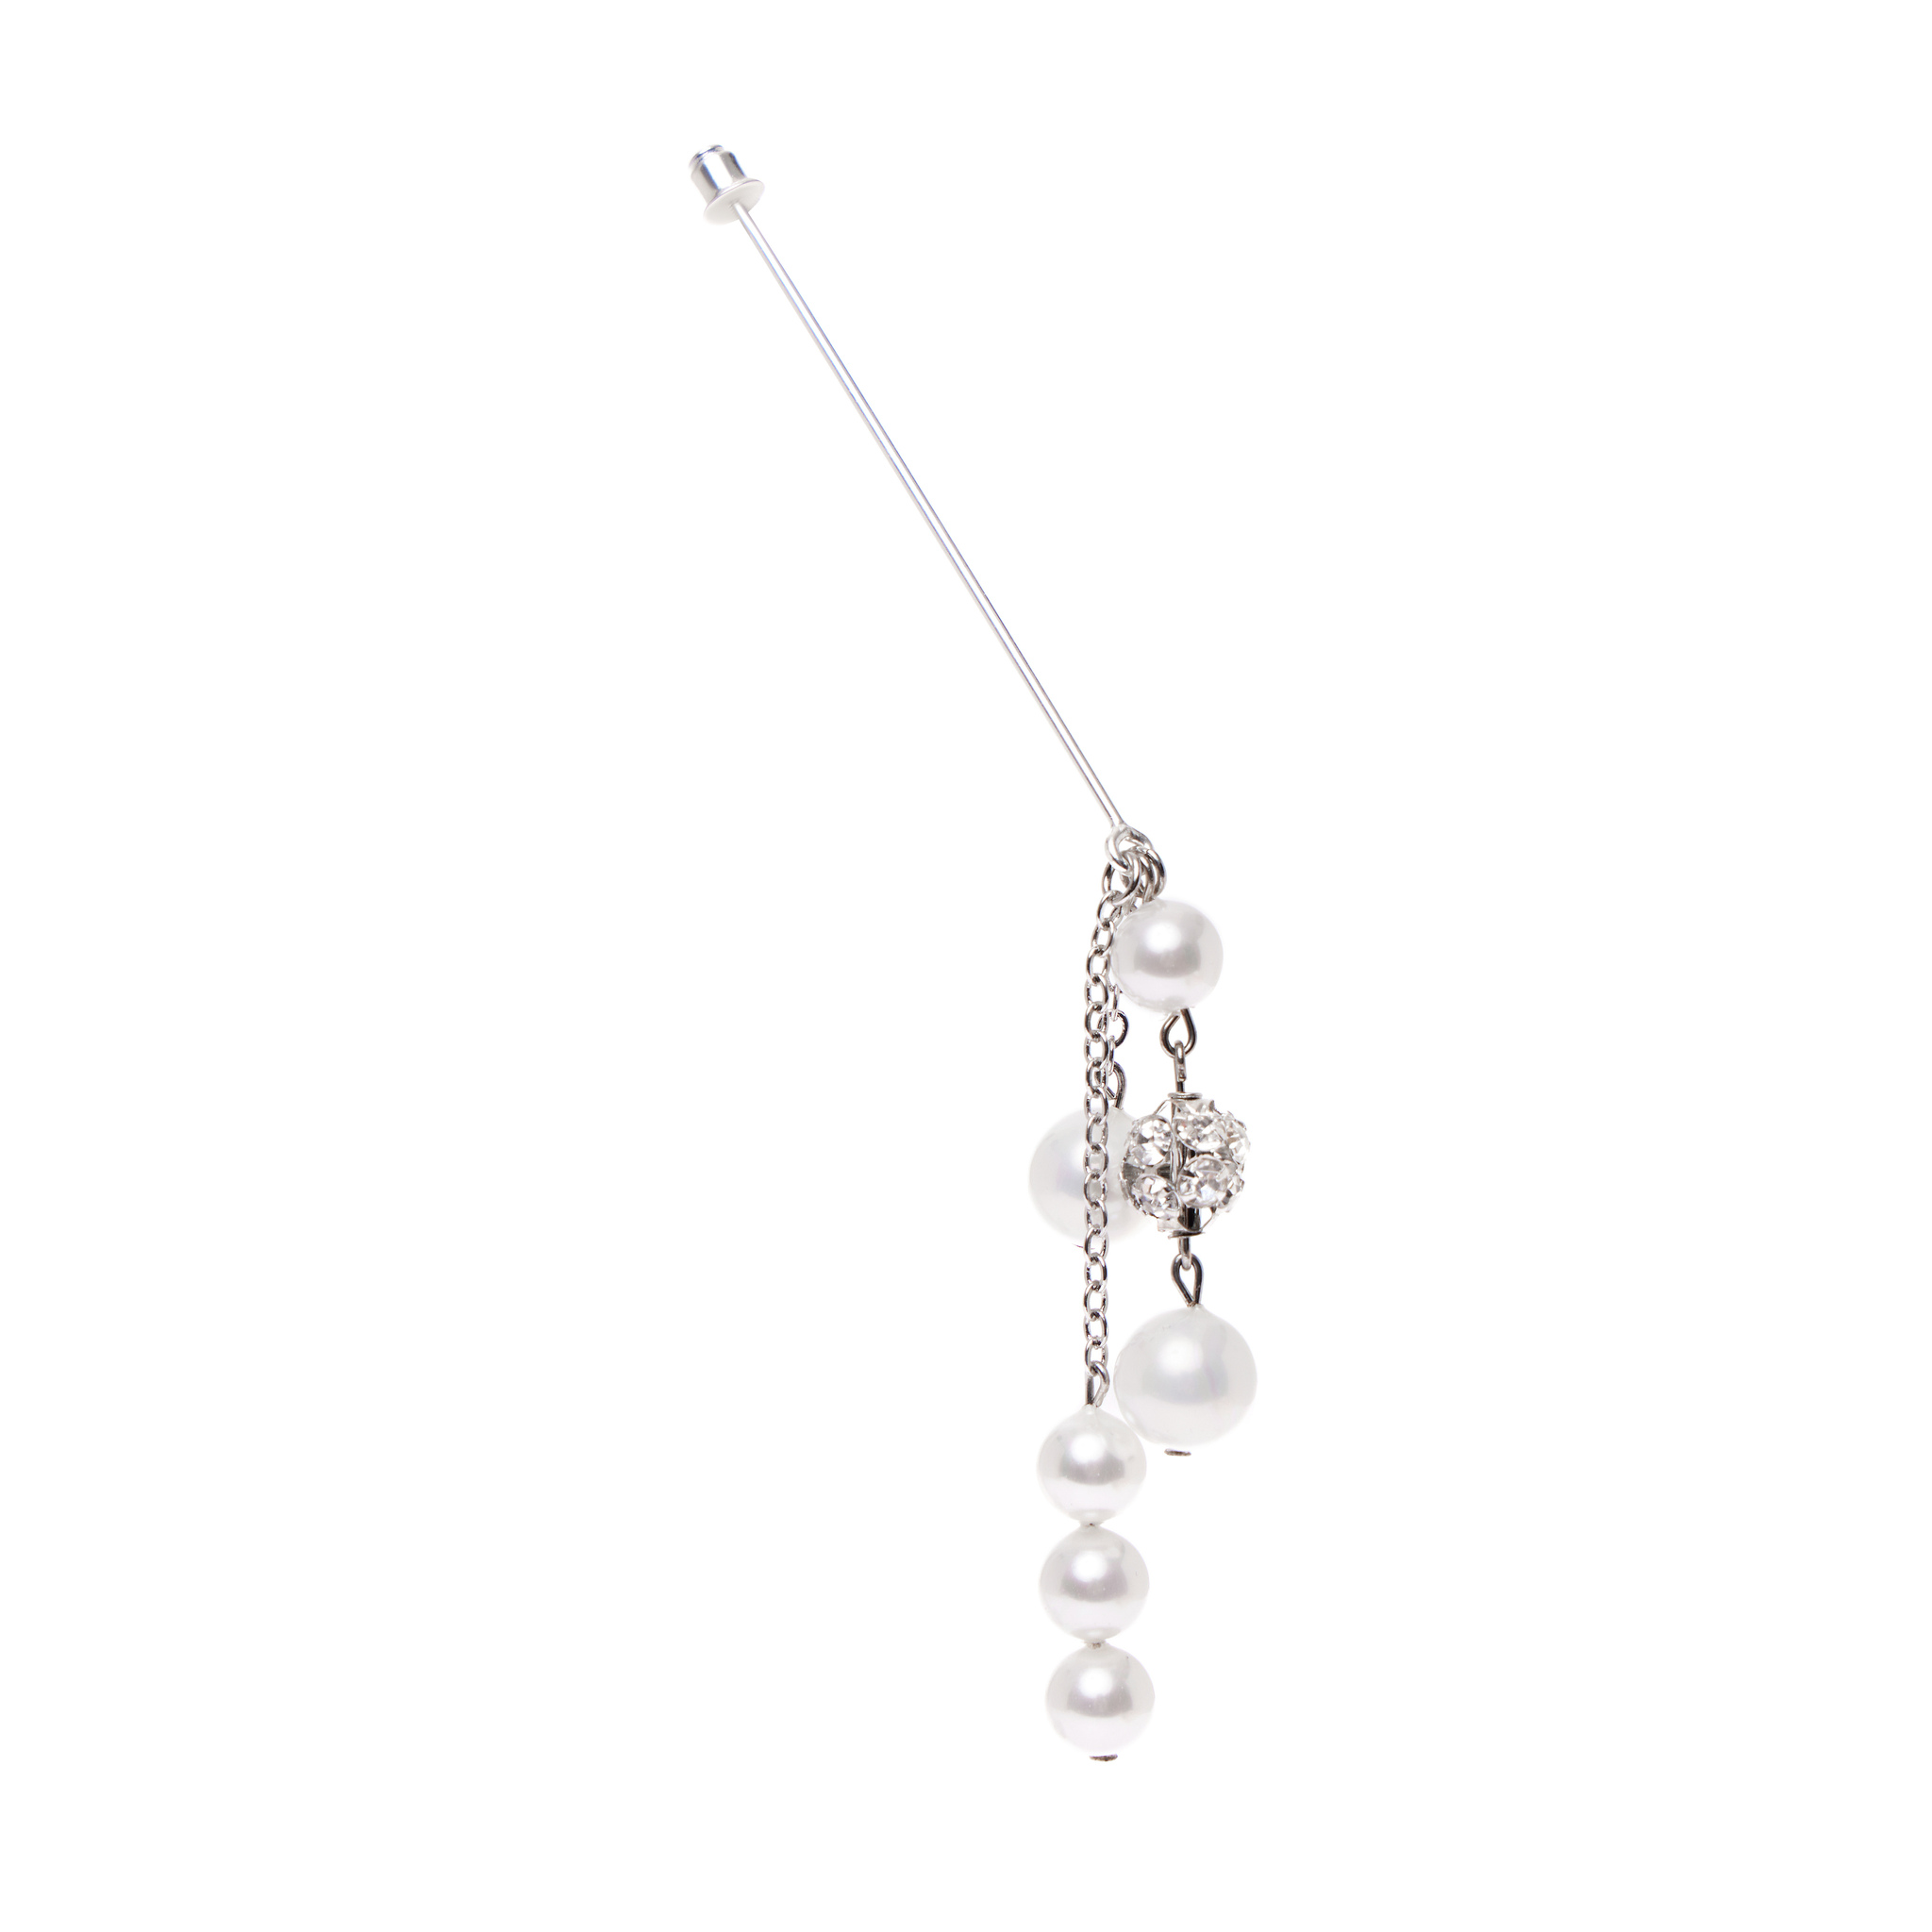 HOLLY JUNE Брошь Pearly Nuance Brooch holly june серьга pearly mess earring